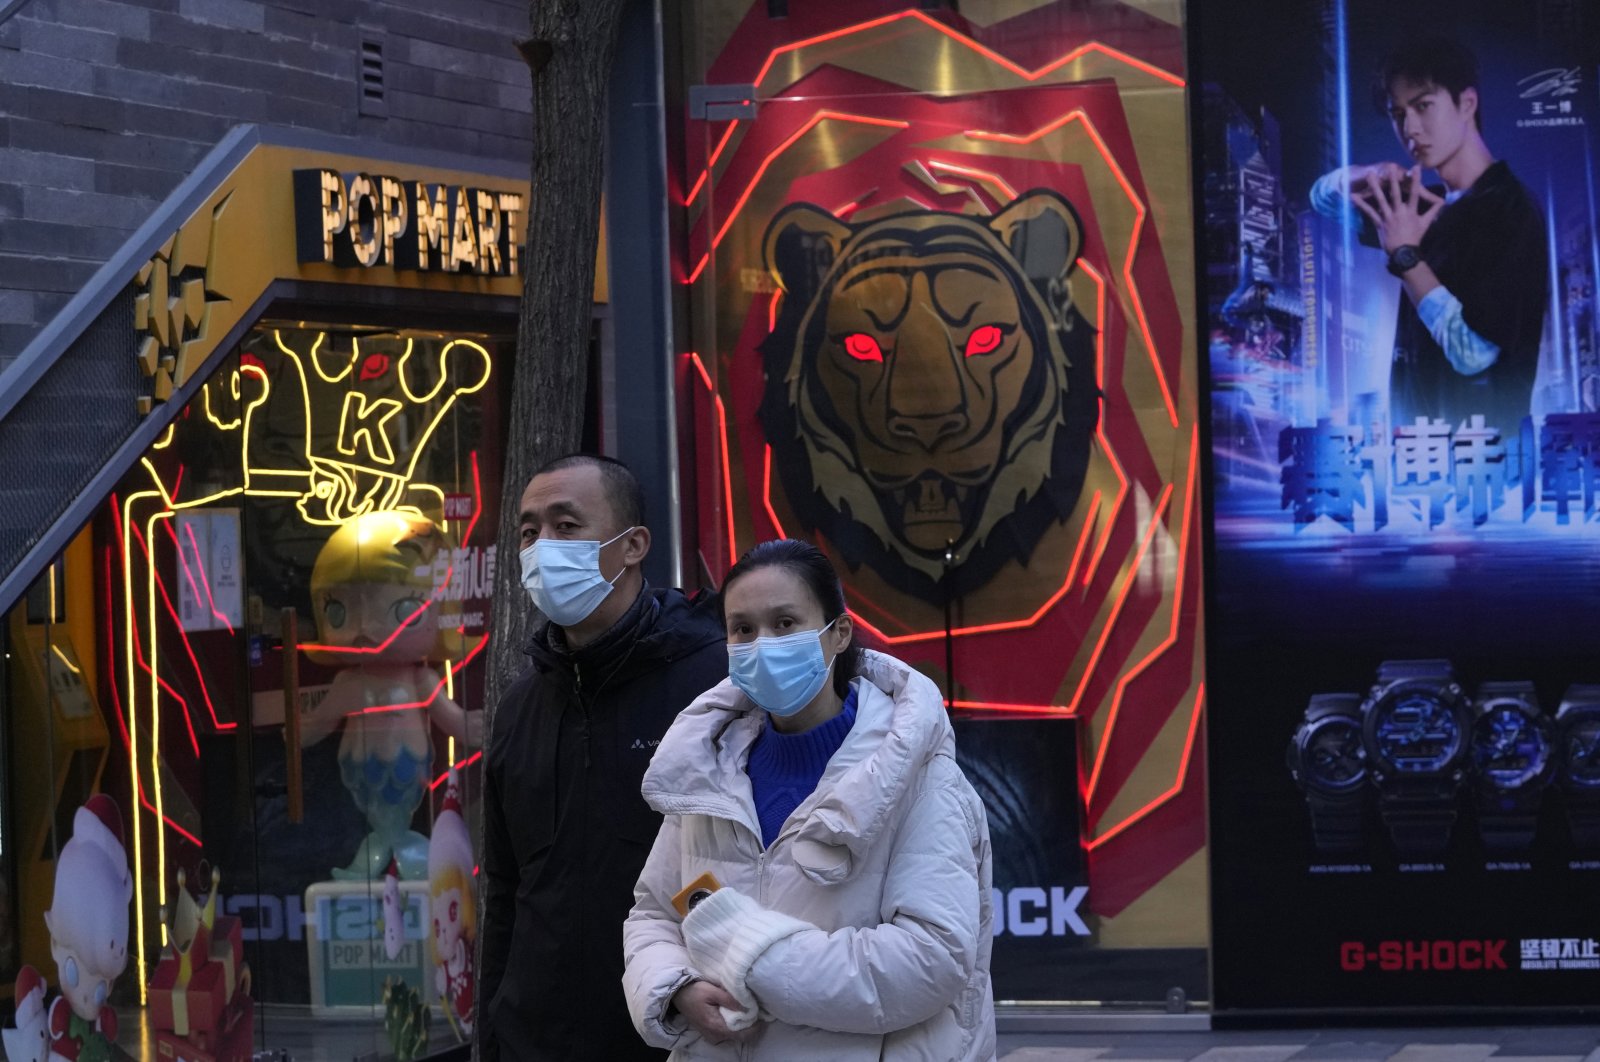 Residents wearing masks as protection against the coronavirus walk past shop decorations in Beijing, China, Nov. 30, 2021. (AP Photo)